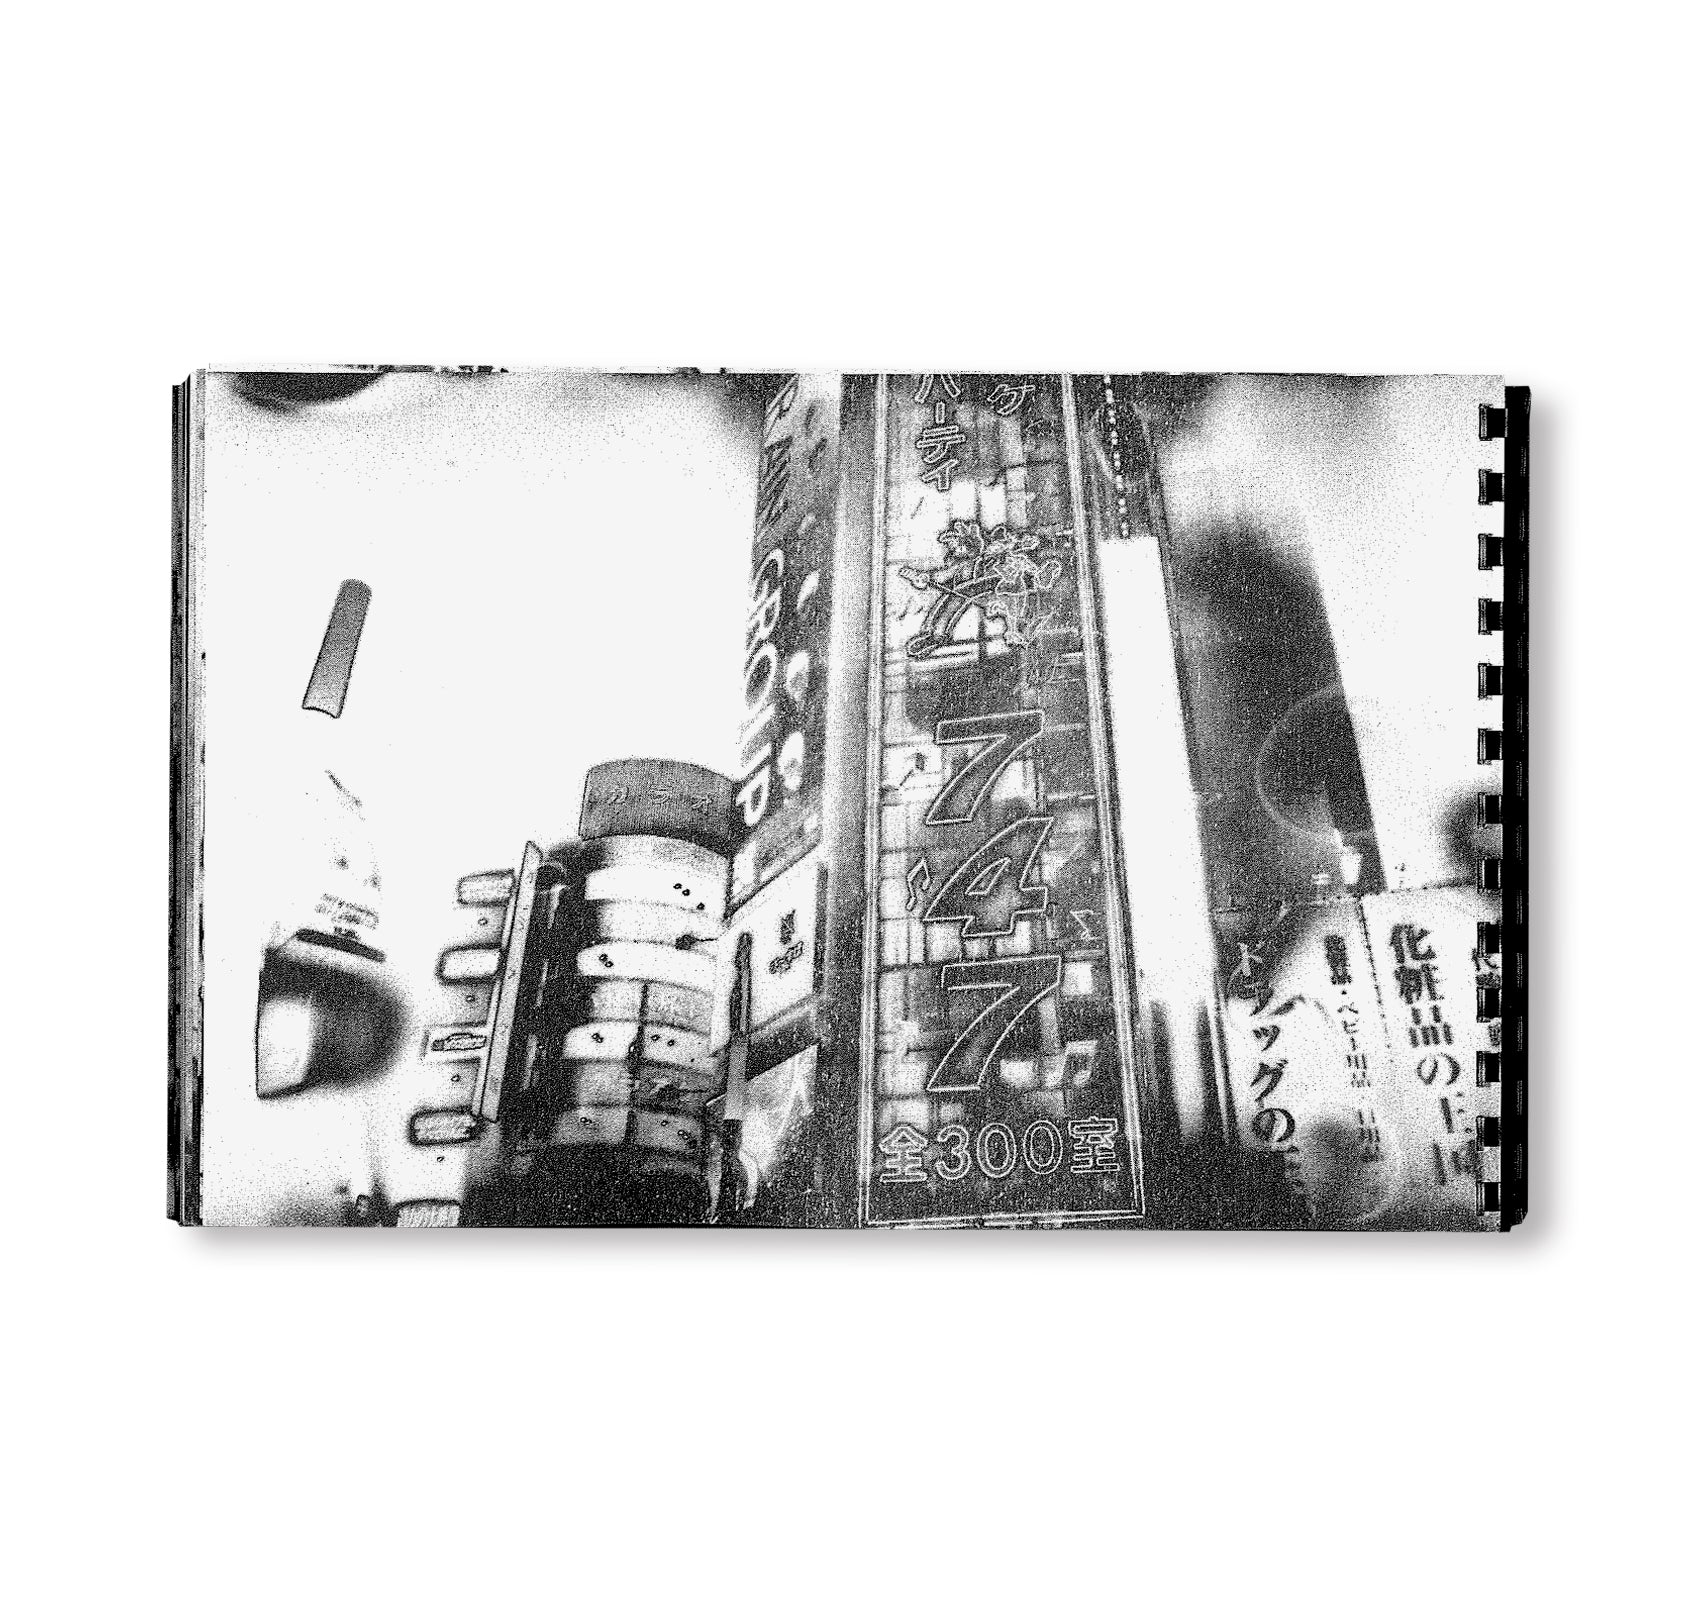 FREE PLAY by Antony Cairns [SIGNED]